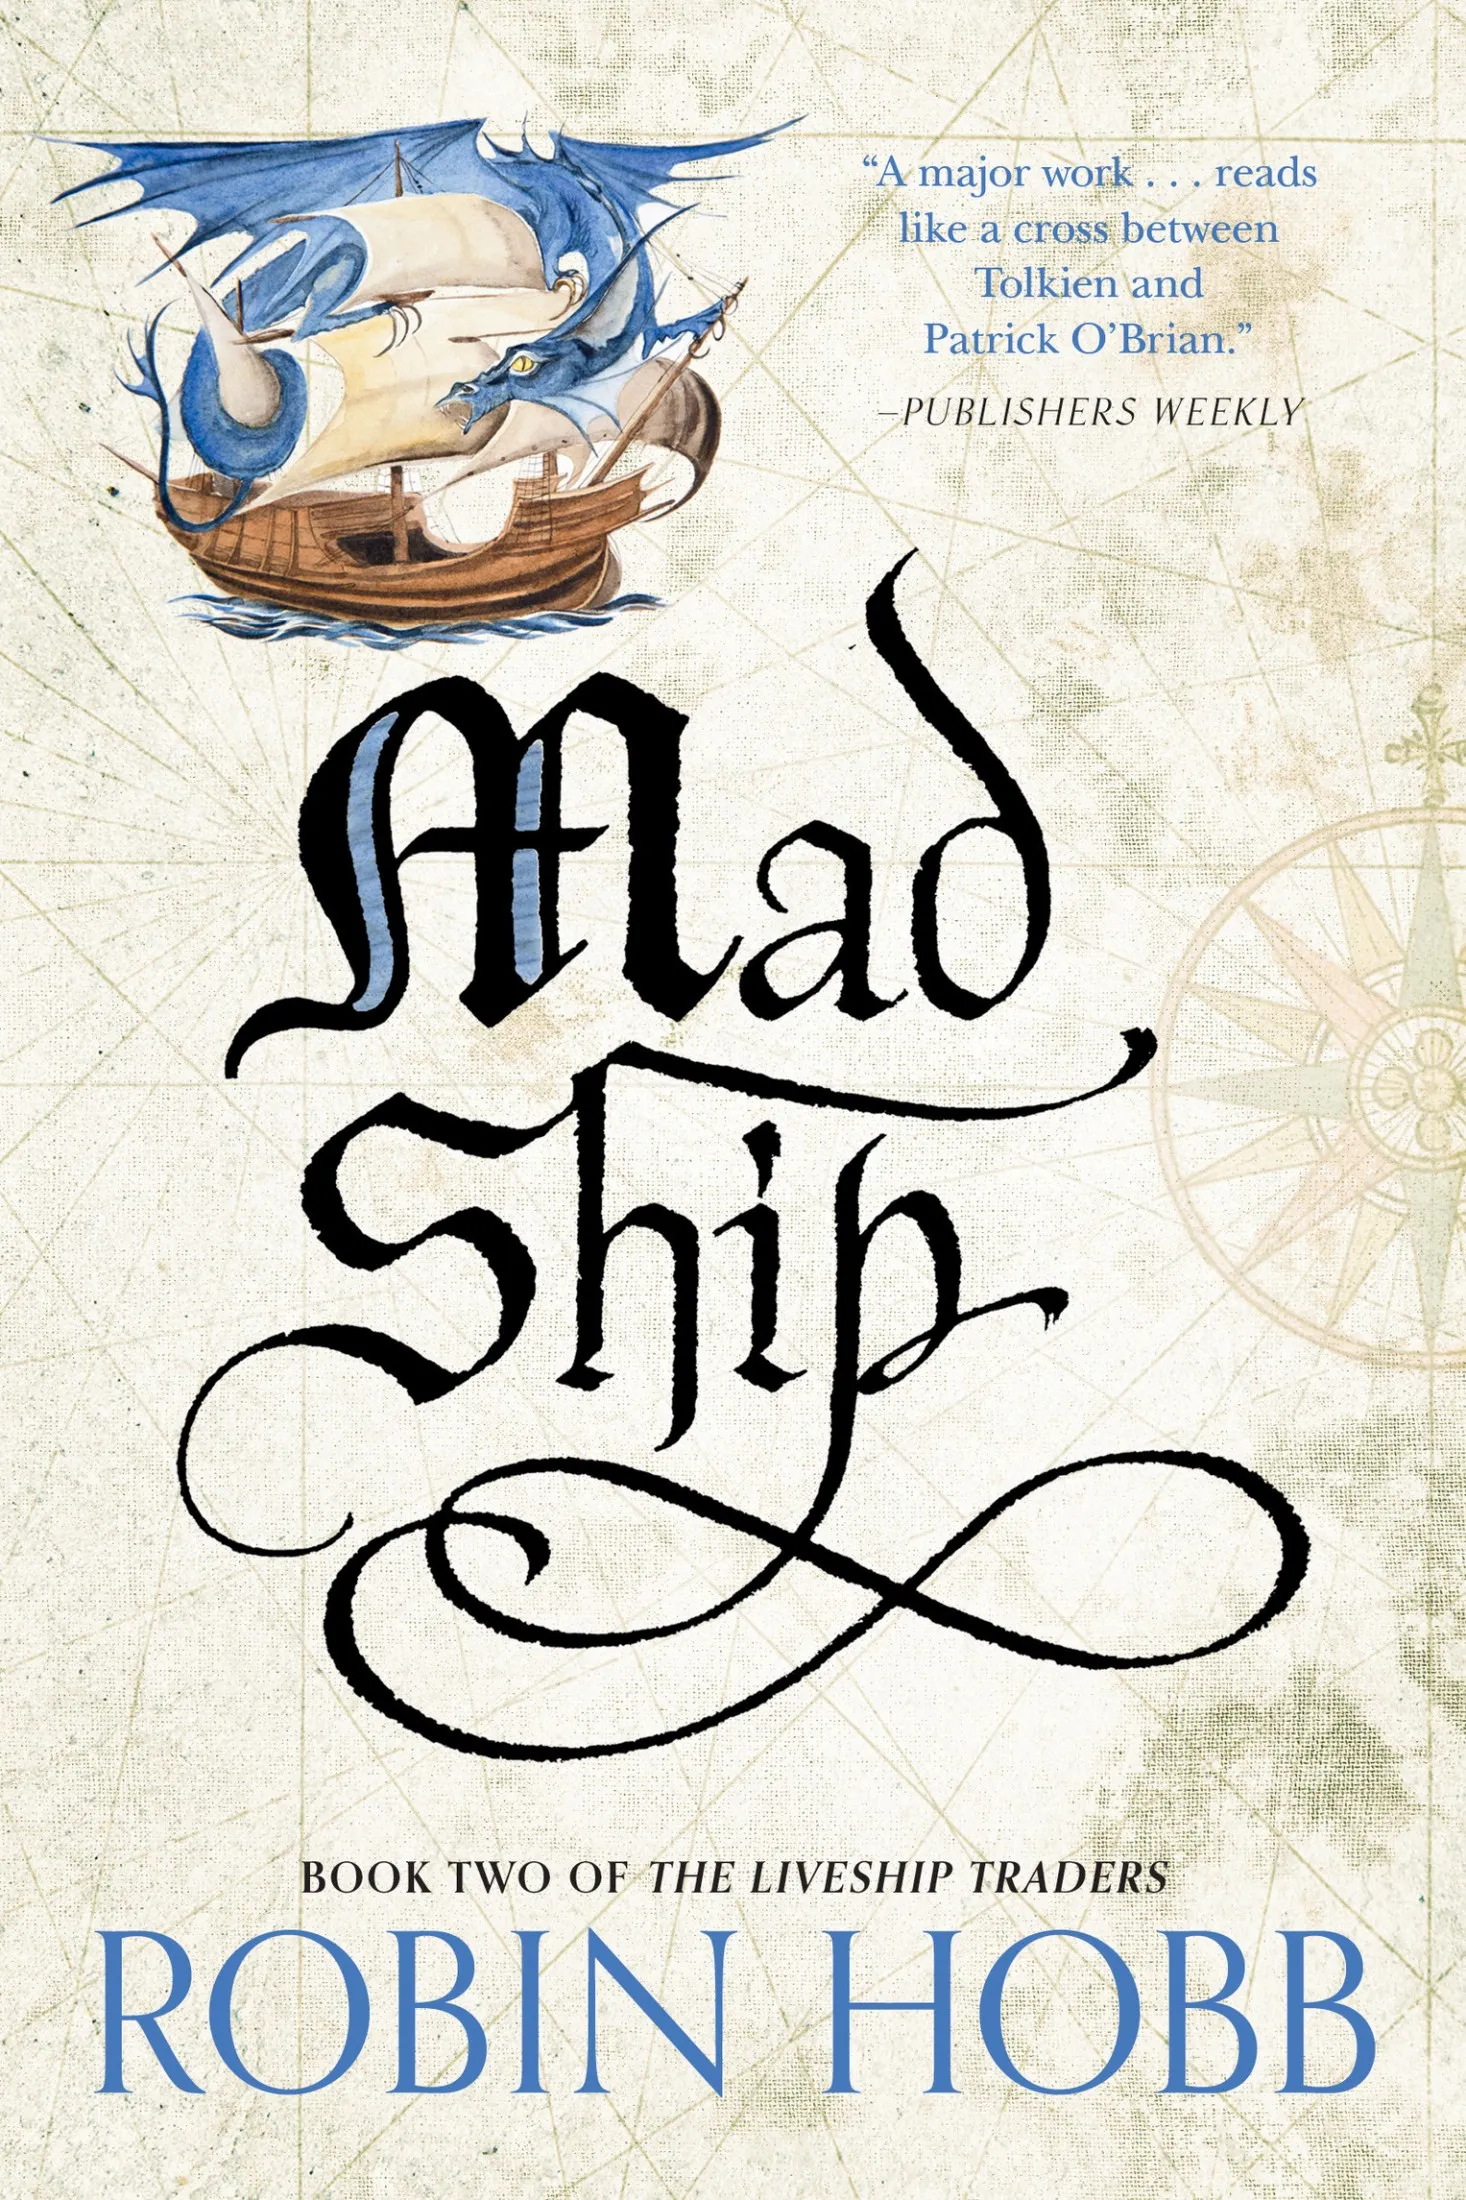 Mad Ship (Liveship Traders Trilogy #2) (The Realm of the Elderlings #5)